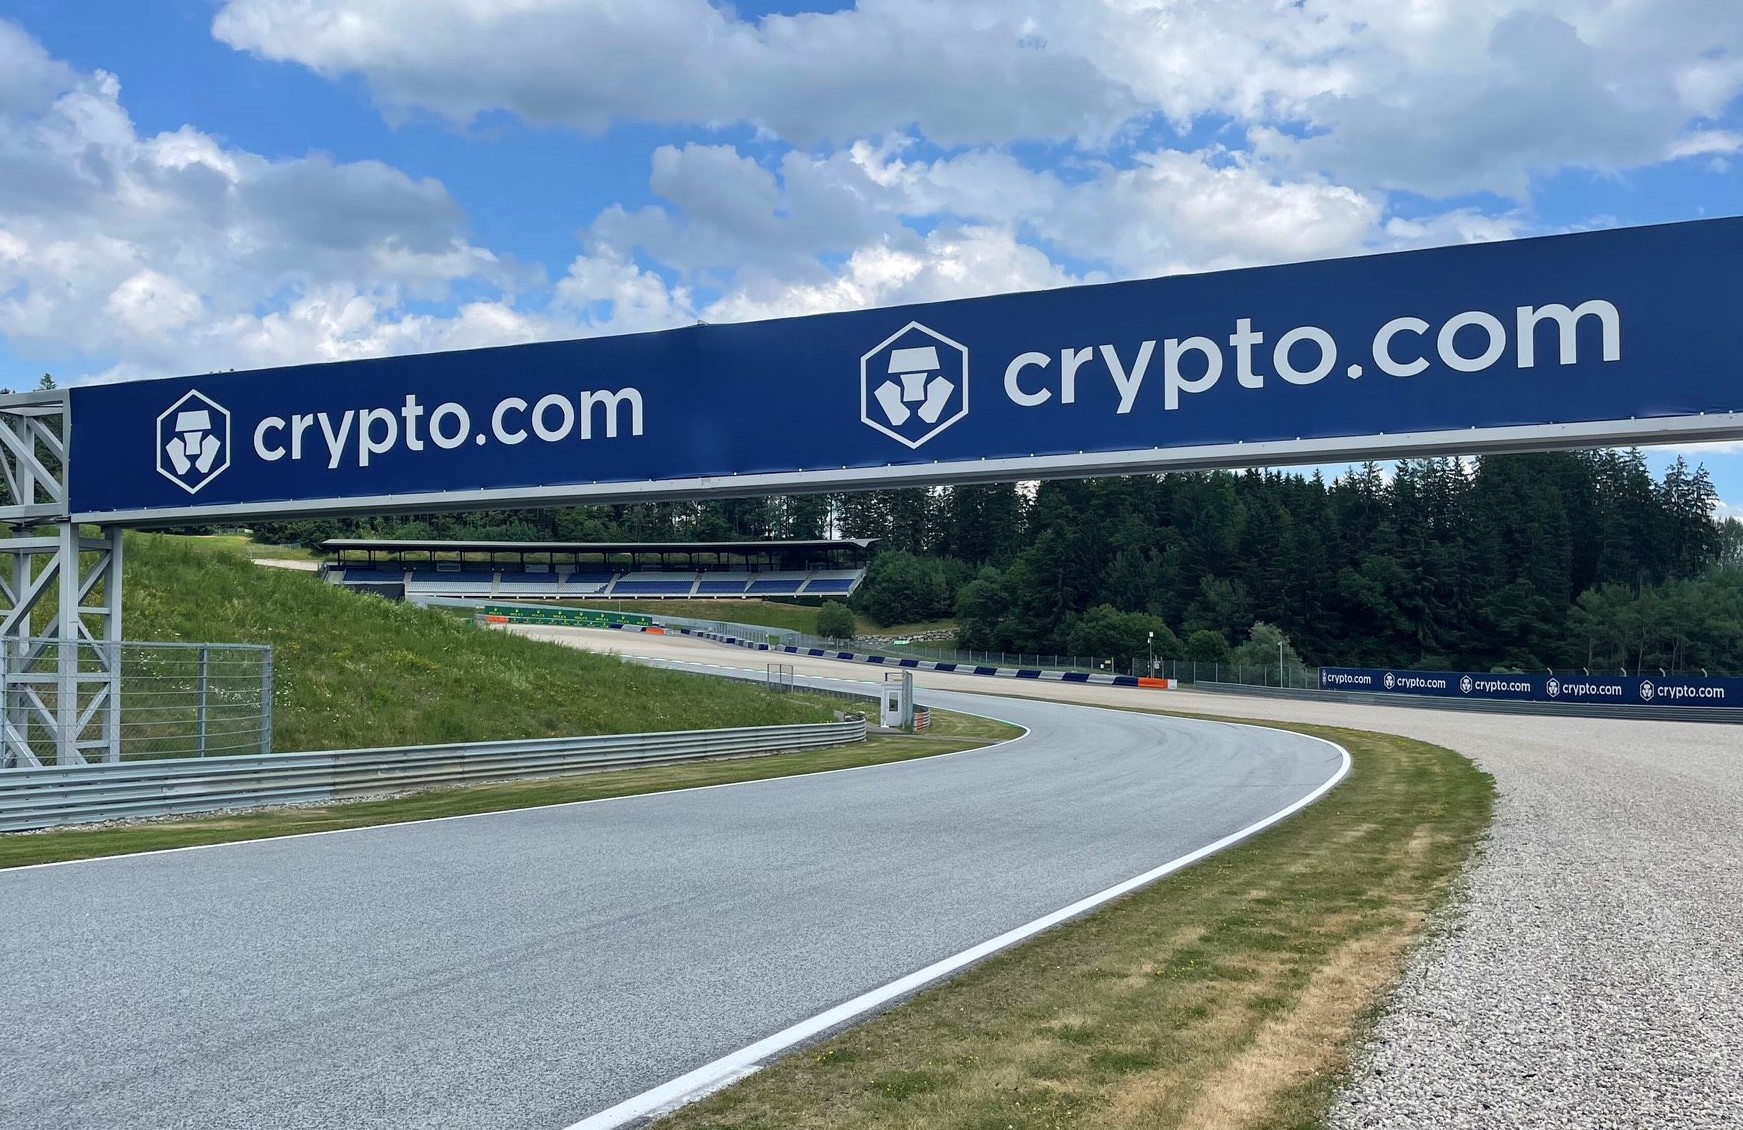 Crypto.com signs a nine-year deal to become the official sponsor of Miami GP